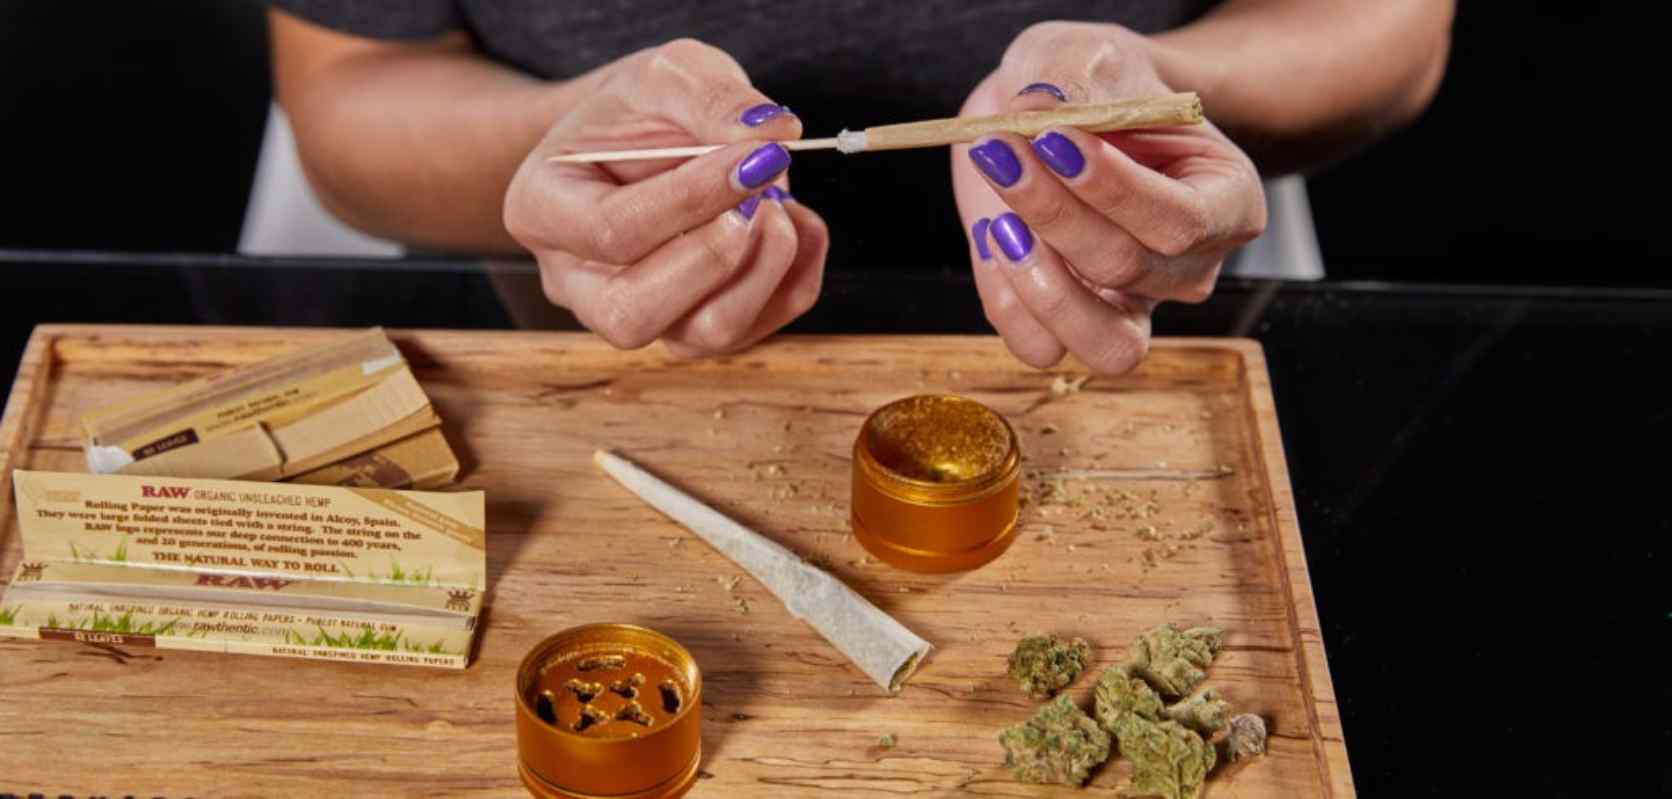 Woman learning how to make a cross joint and how to roll a cross joint with weed from an online dispensary in Canada.